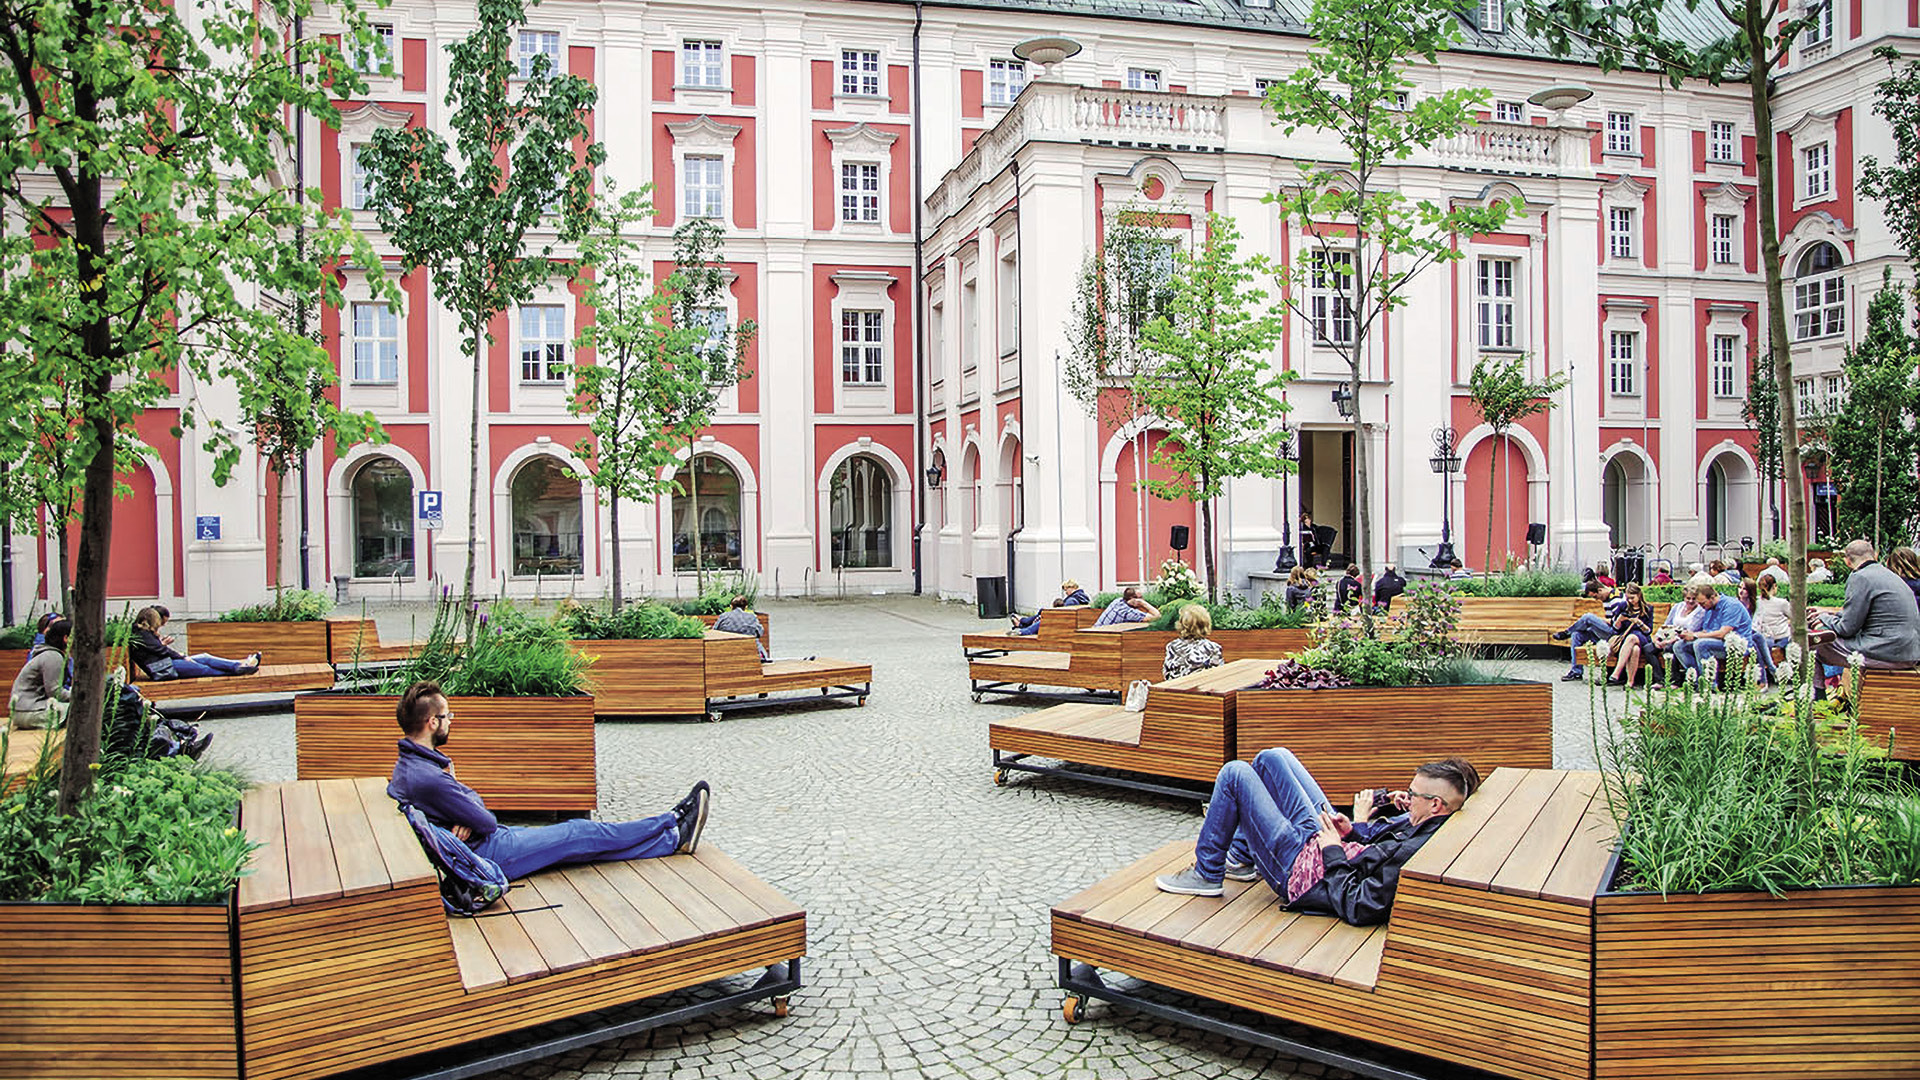 Meanwhile placemaking: how to give purpose to neglected spaces?